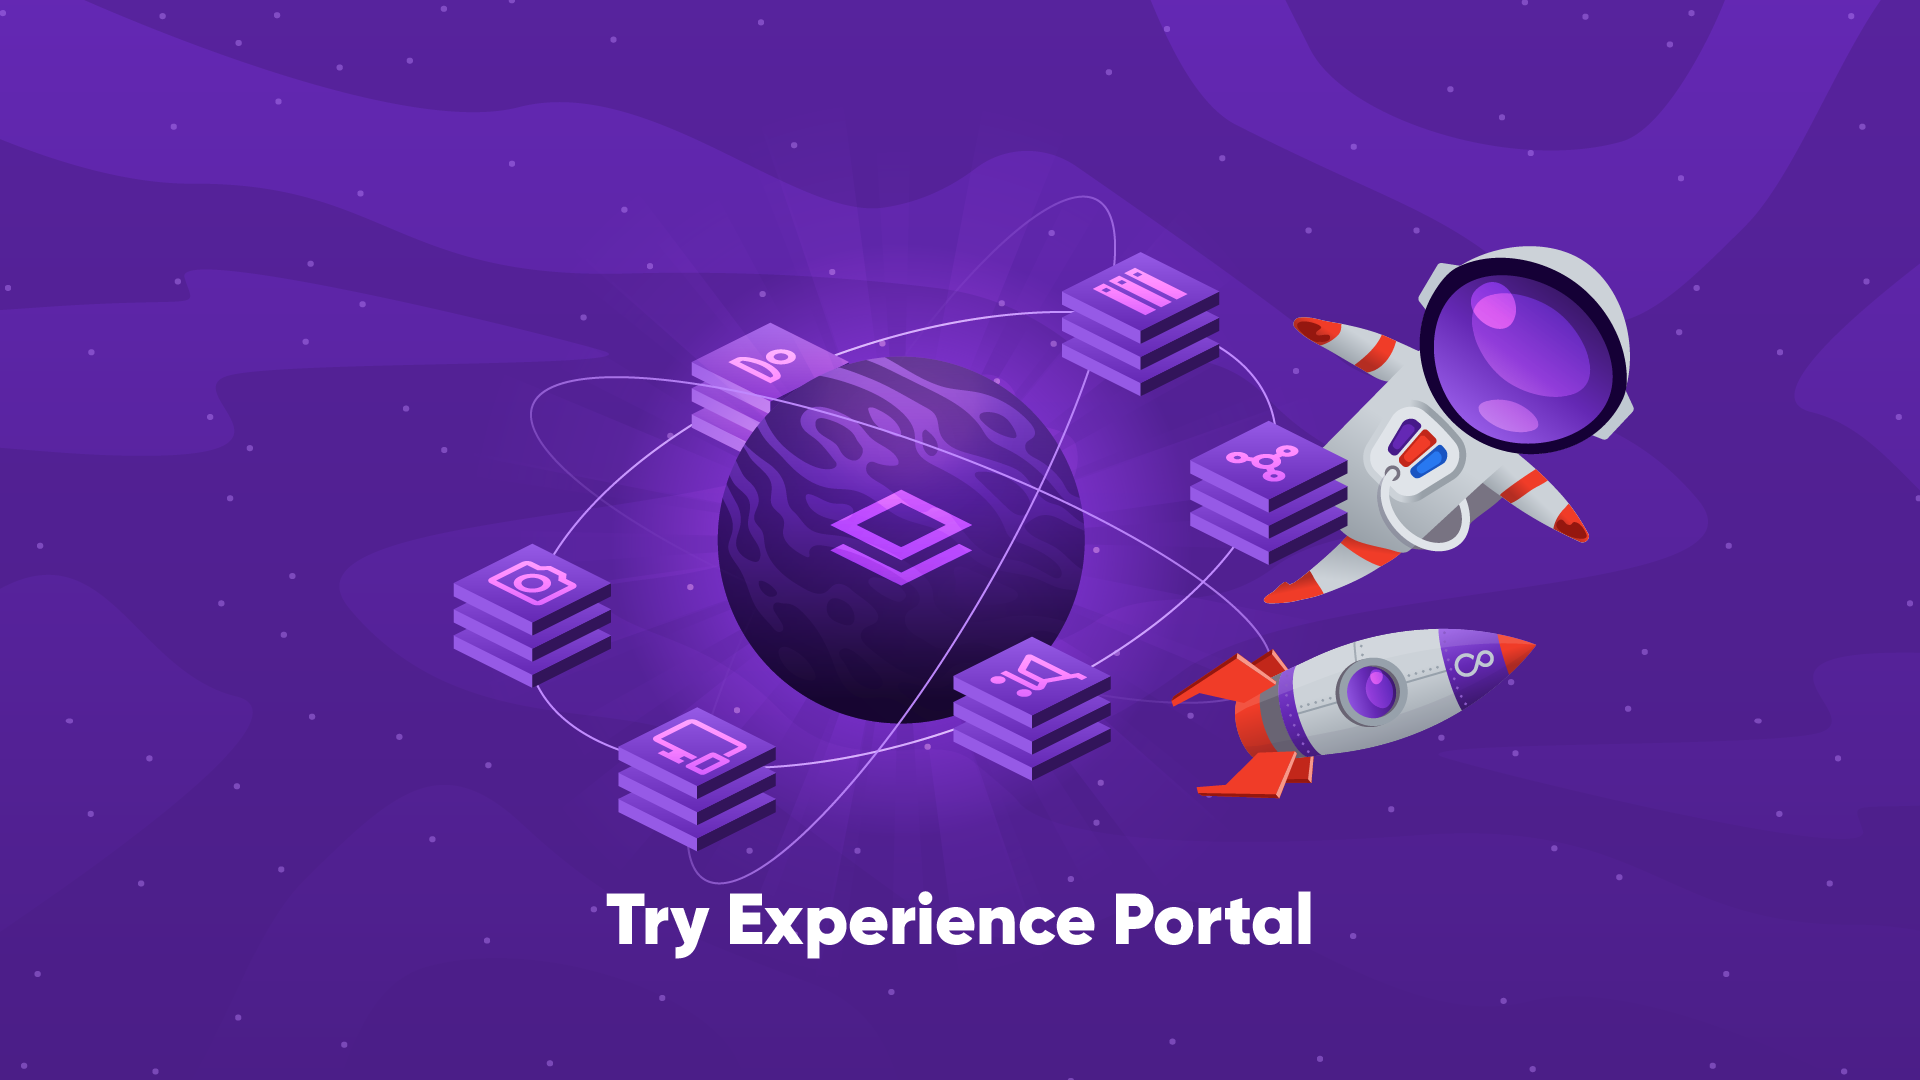 Try Experience Portal's image